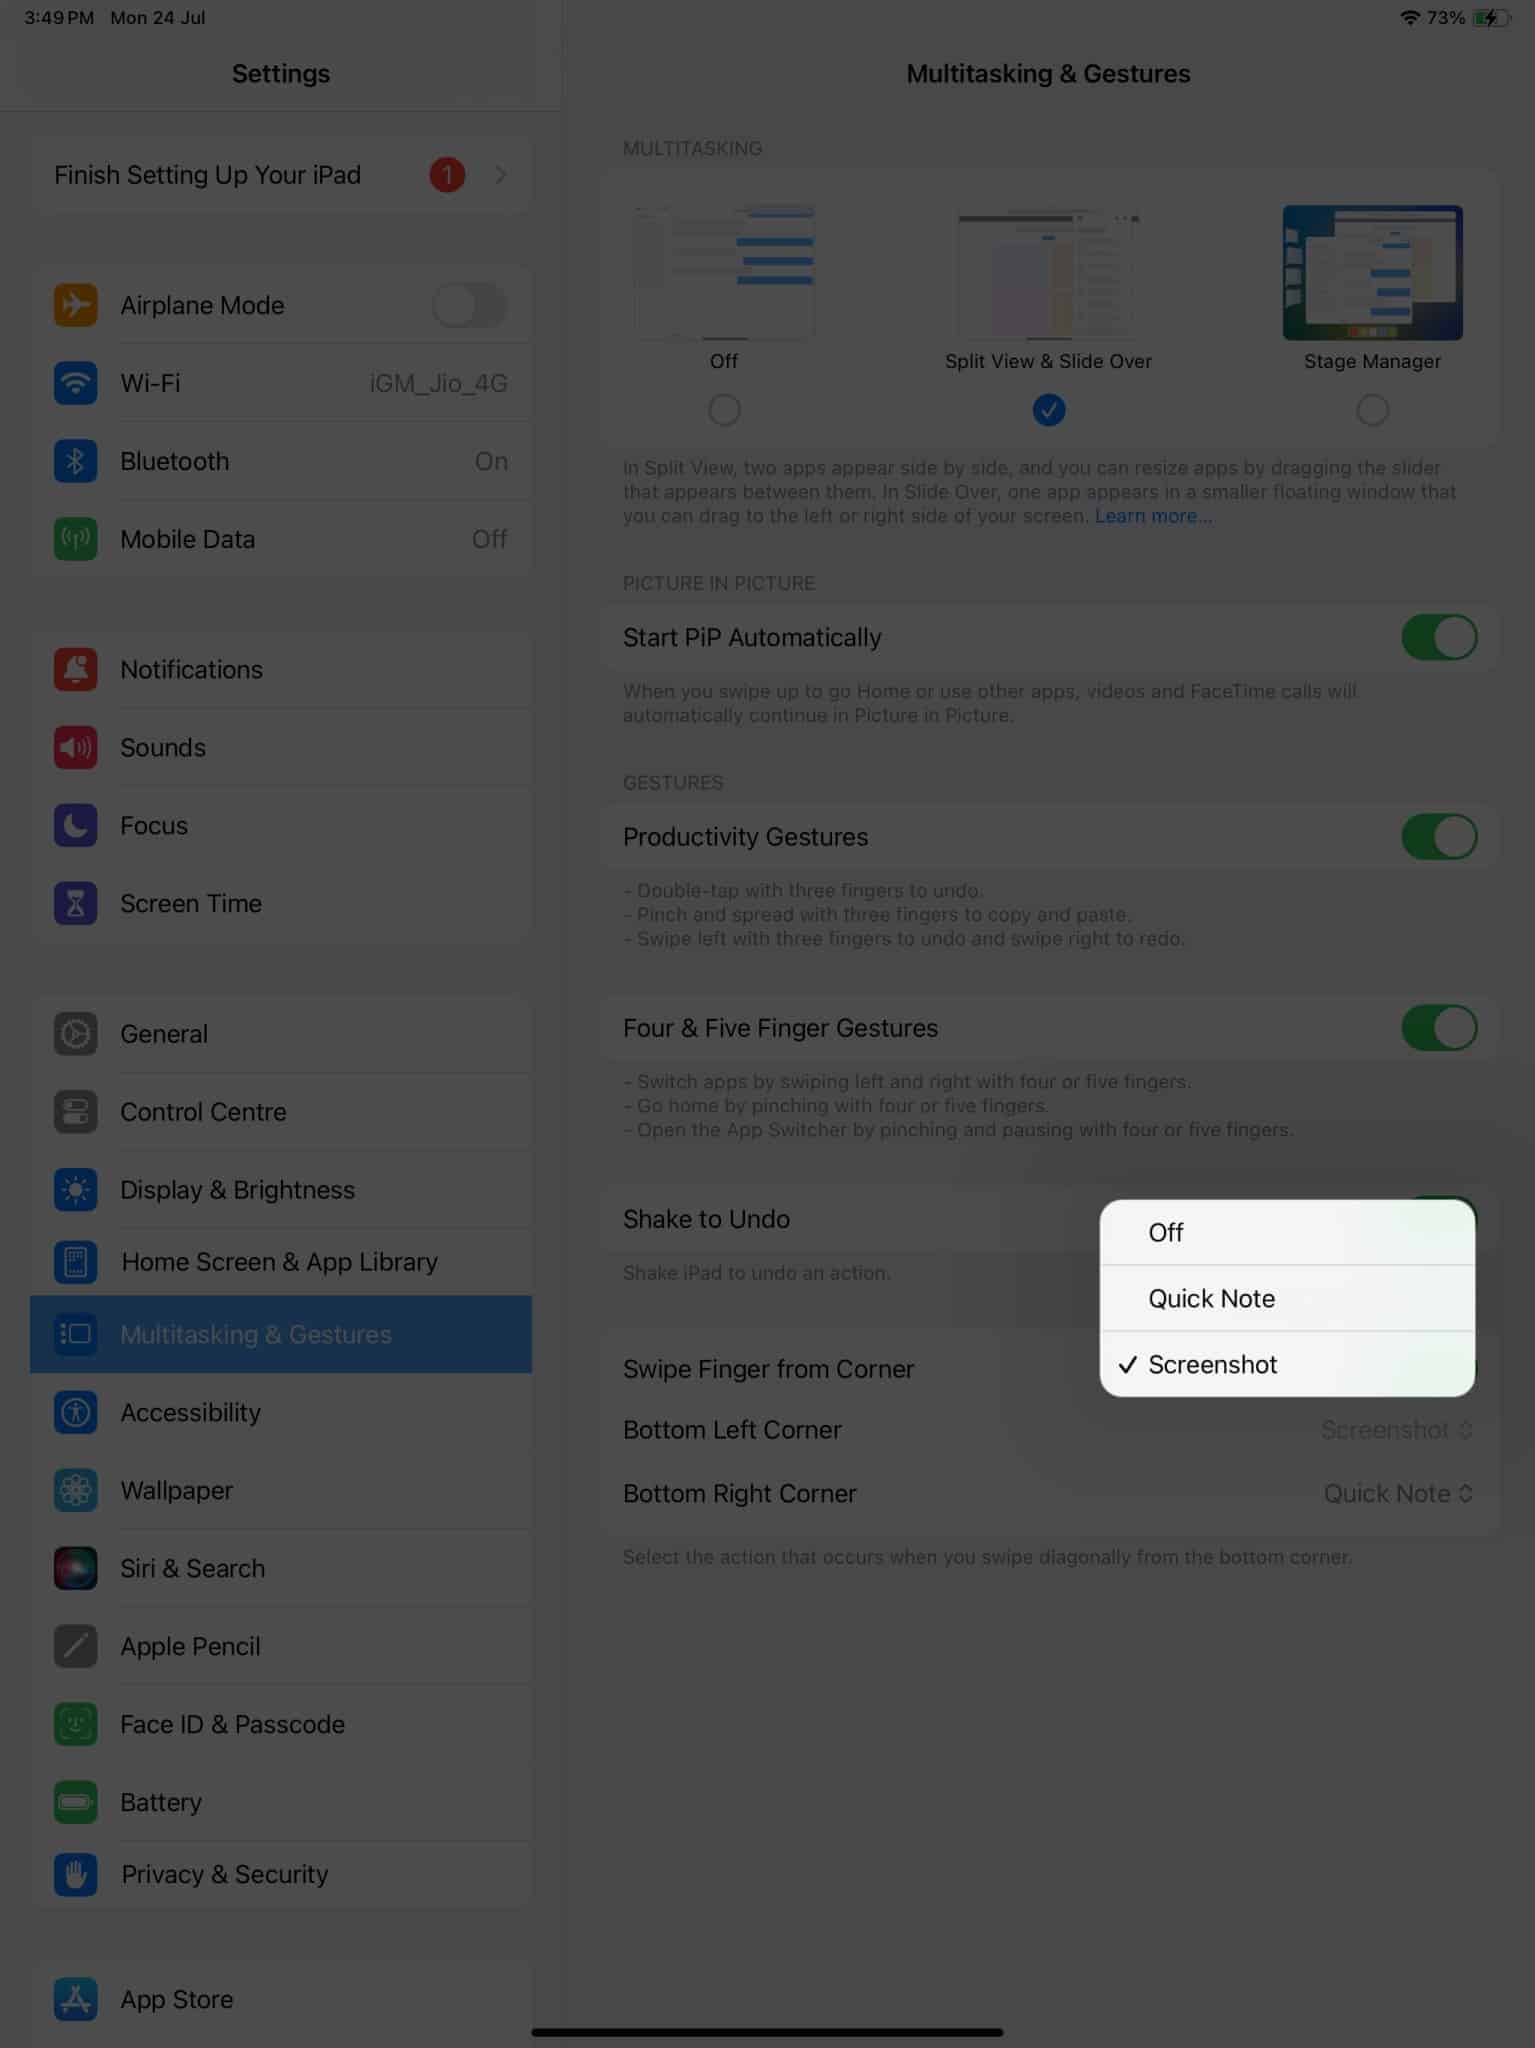 Select among, Off, Screenshots, Quick Note in settings